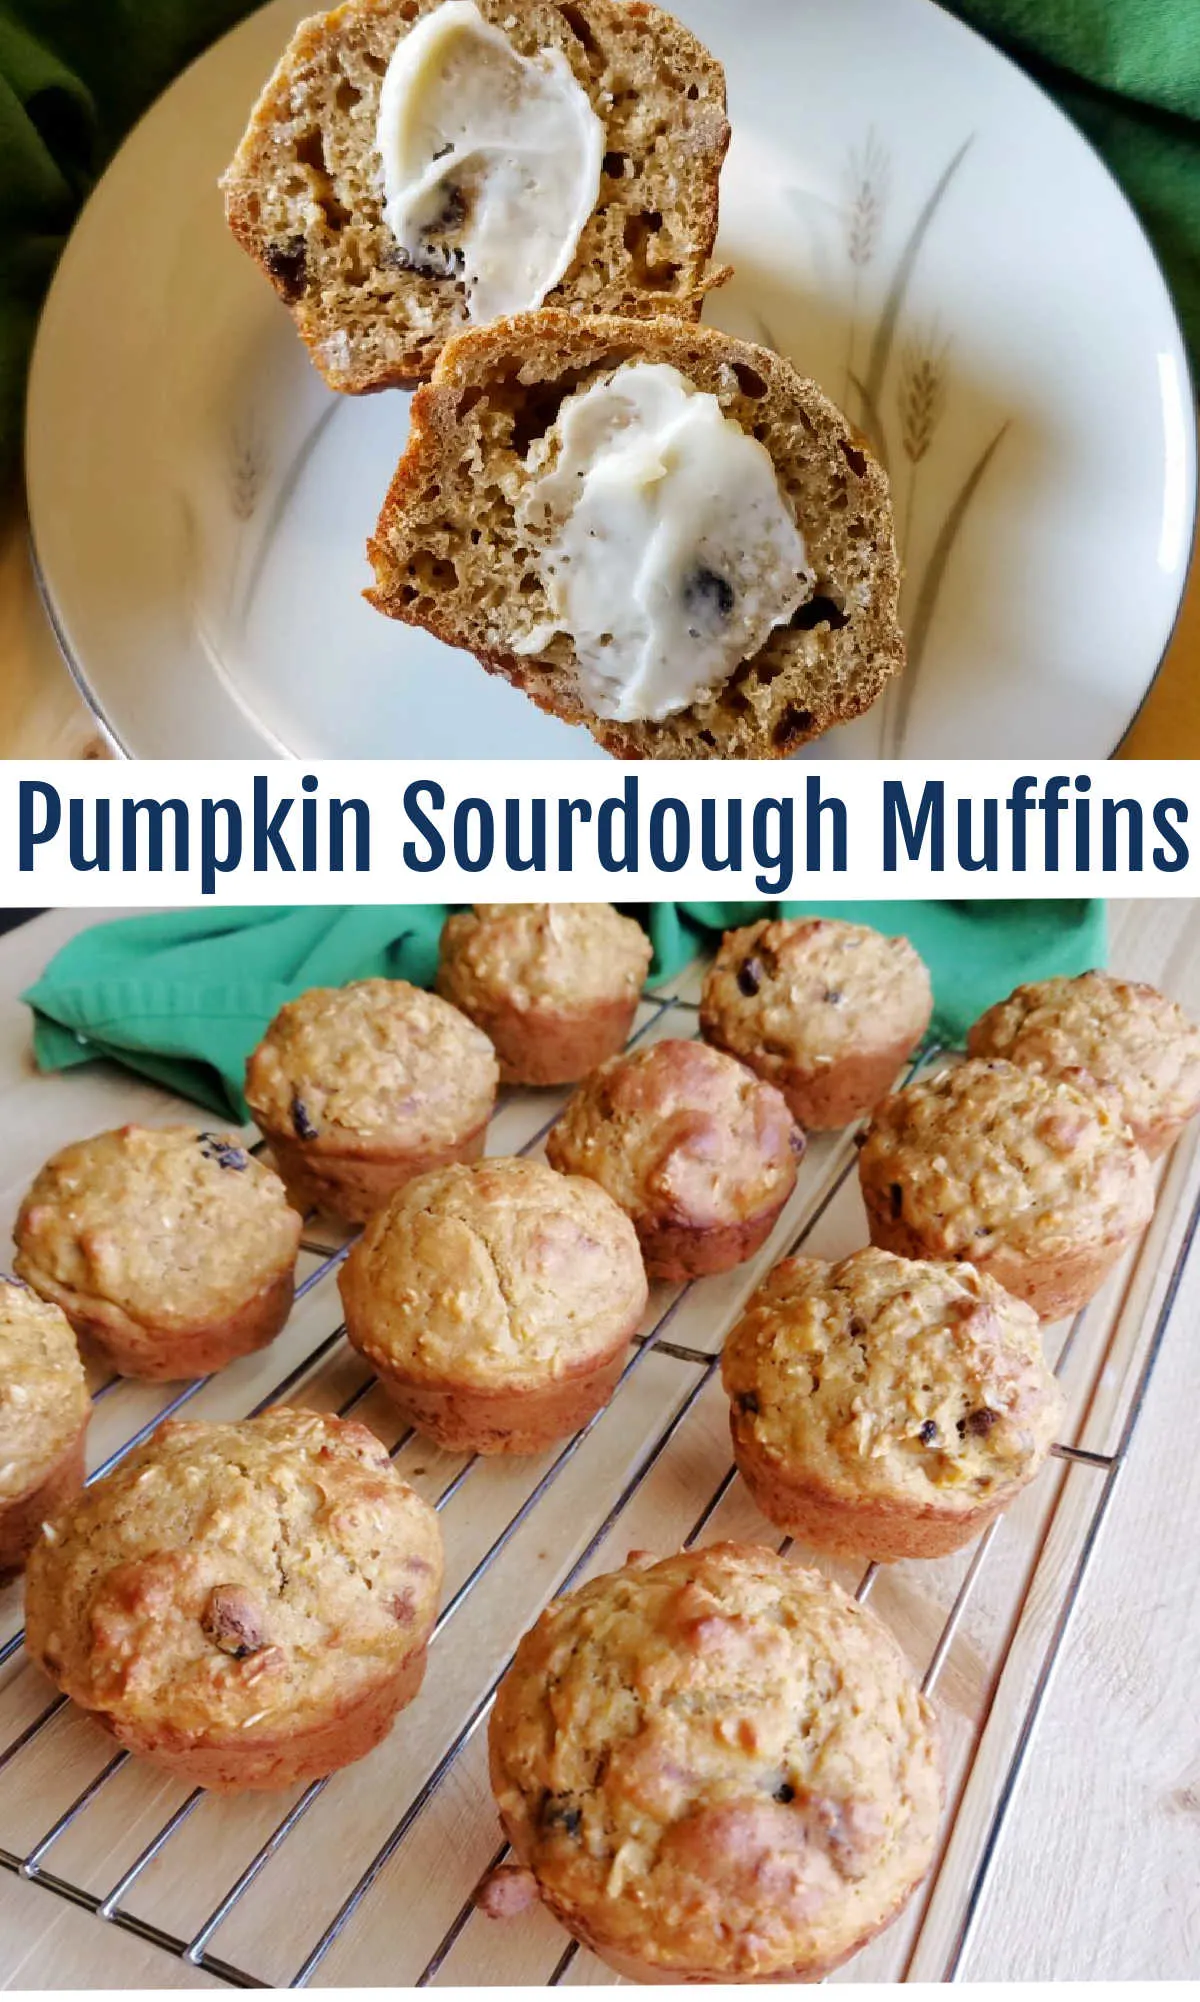 There is a ton of fall flavor packed into the muffins. Apples, pumpkin and cranberries join forces with sourdough to bring you surprisingly healthy but still deliciously tender muffins.